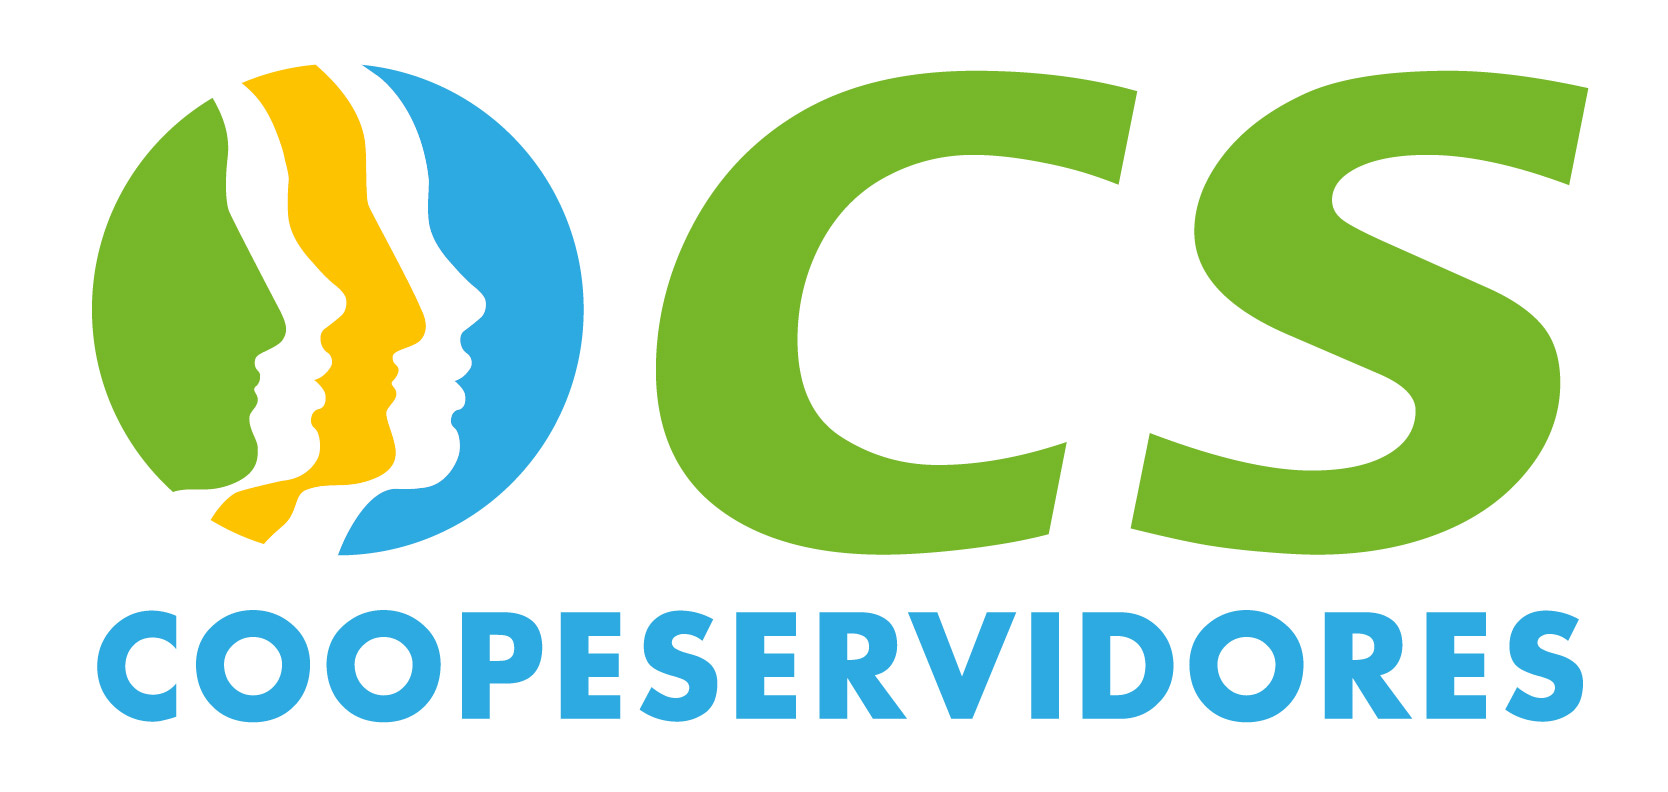 Coopeservidores R.L.